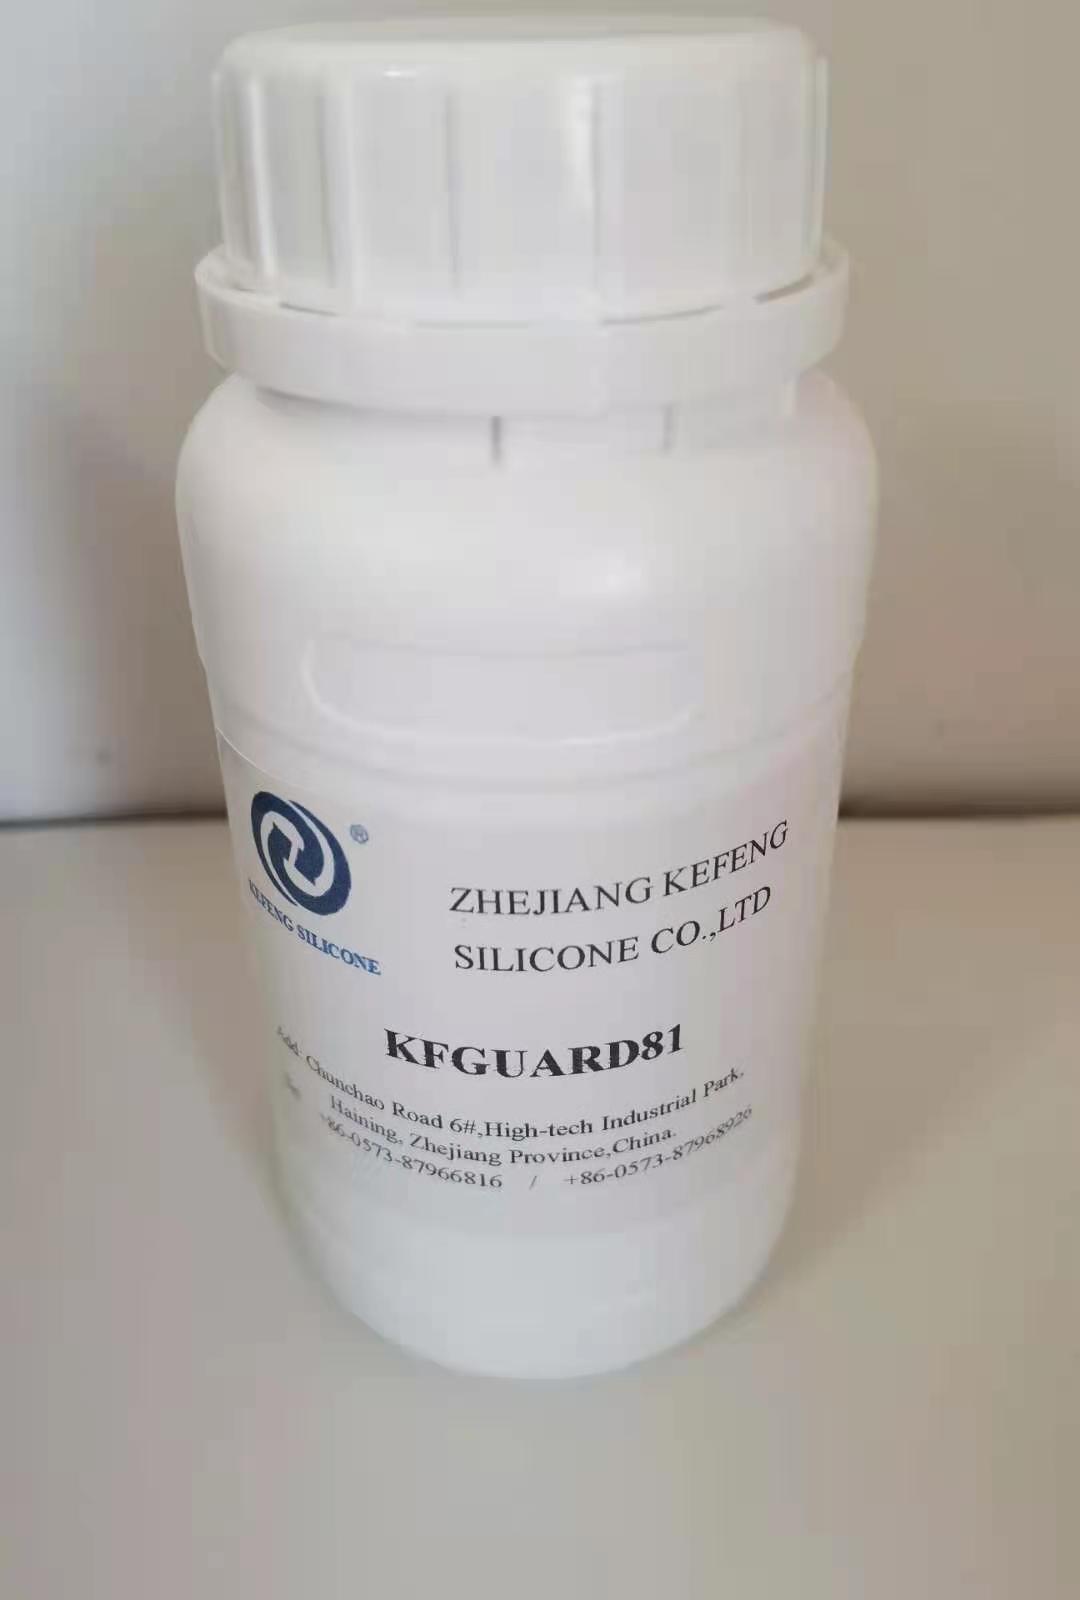 Silicone Oil 1000 cSt for Treadmills and Exercise Bikes